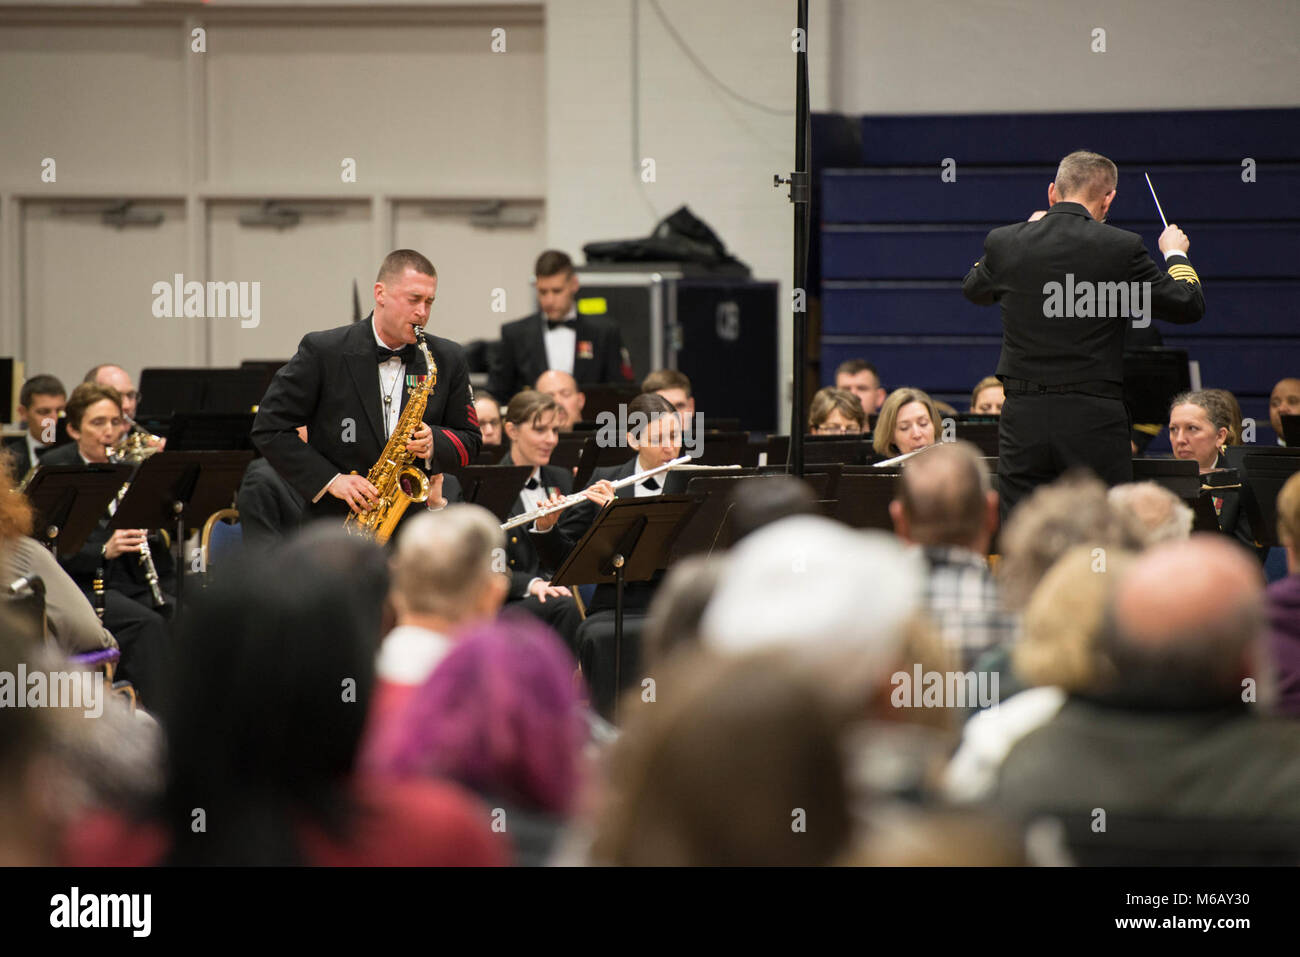 PRICE, Utah (Feb. 27, 2018) Musician 1st Class Jonathan Yanik performs with the U.S. Navy Band during a concert at Utah State University Eastern in Price, Utah. The Navy Band performed in 12 states during its 21-city, 5,000-mile tour, connecting communities across the nation to their Navy. (U.S. Navy Stock Photo